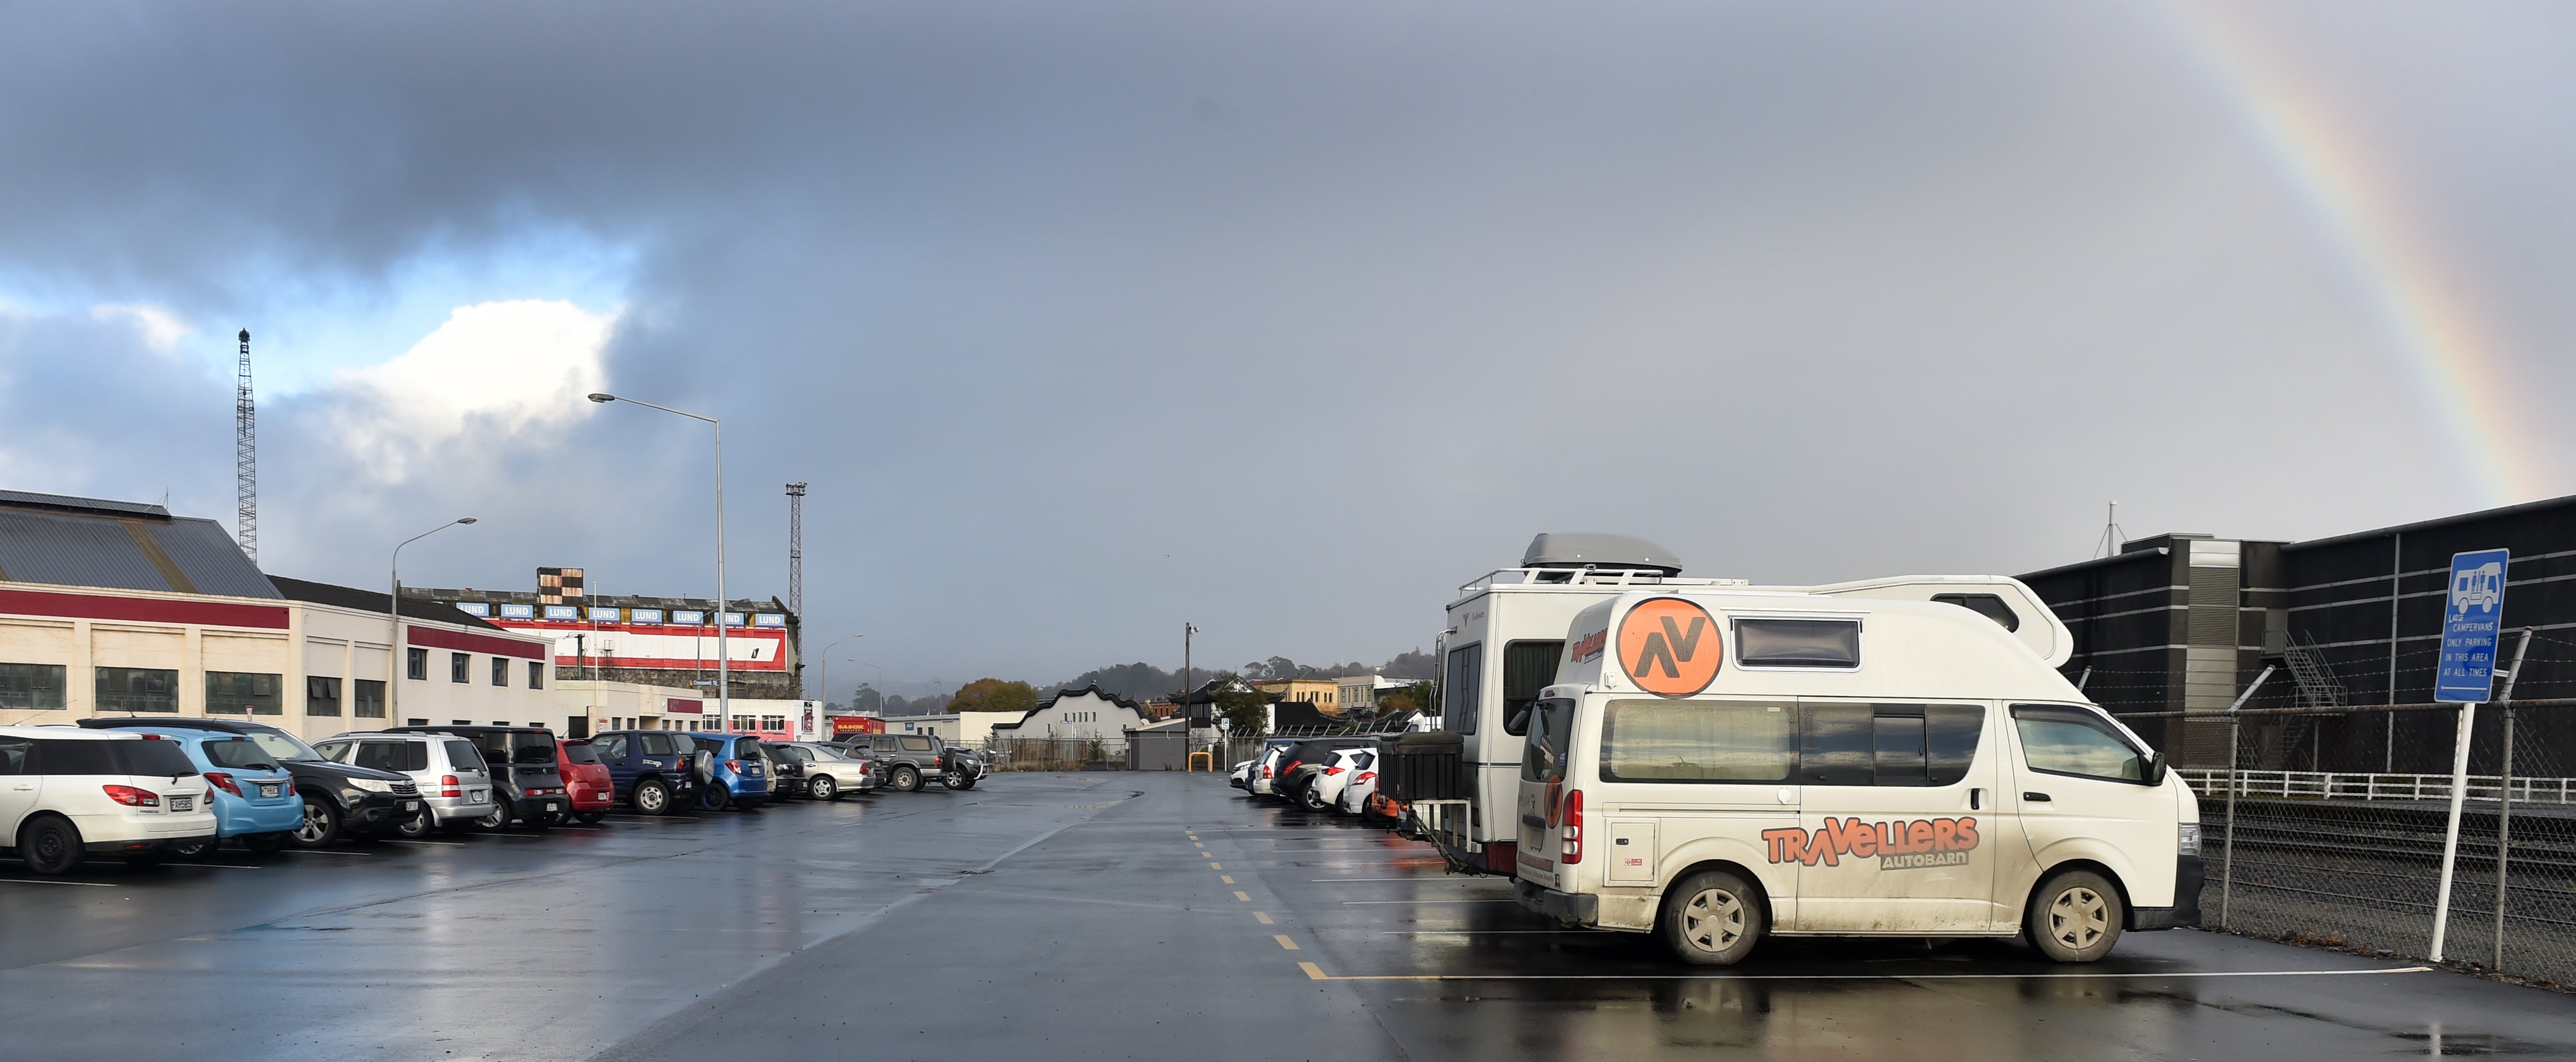 The Thomas Burns St freedom camping car park could become a permanent fixture. PHOTO: PETER...